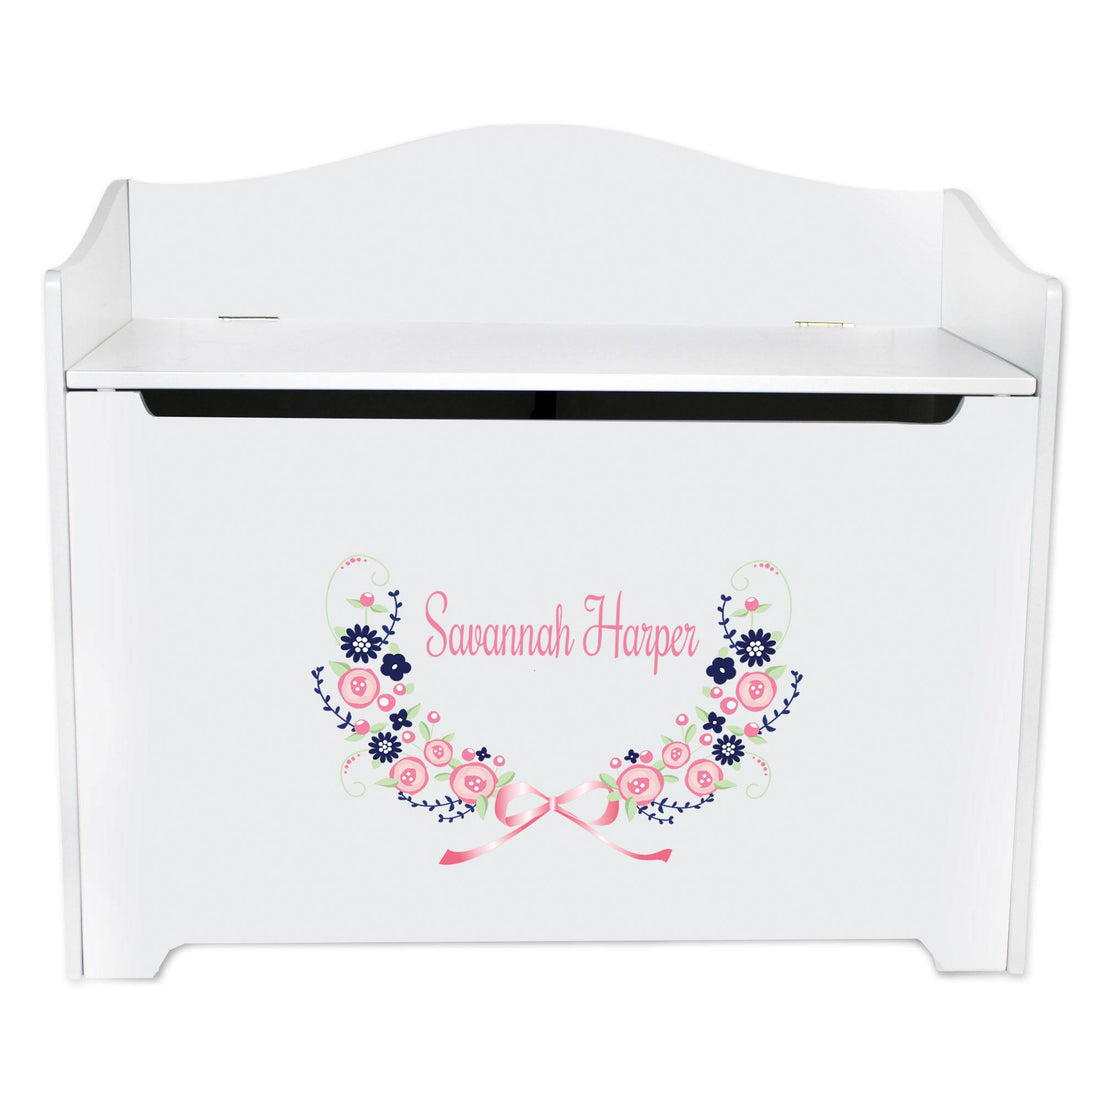 White Wooden Toy Box Bench with Navy Pink Floral Garland design